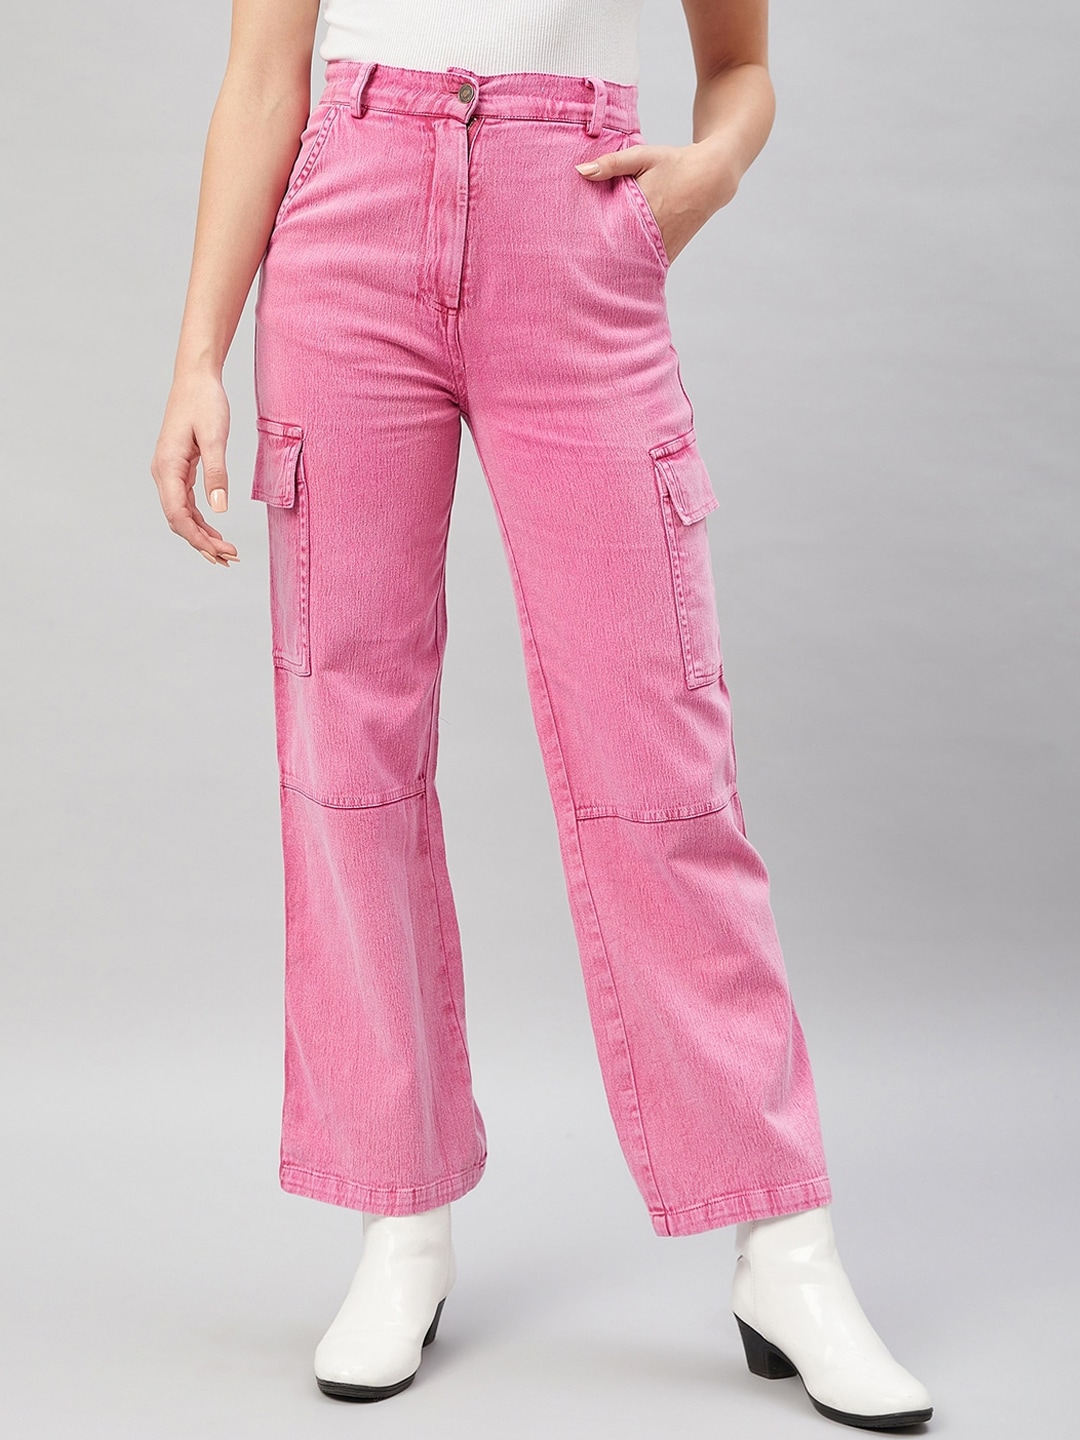 Orchid Hues Women Flared High Rise Clean Look Stretchable Jeans